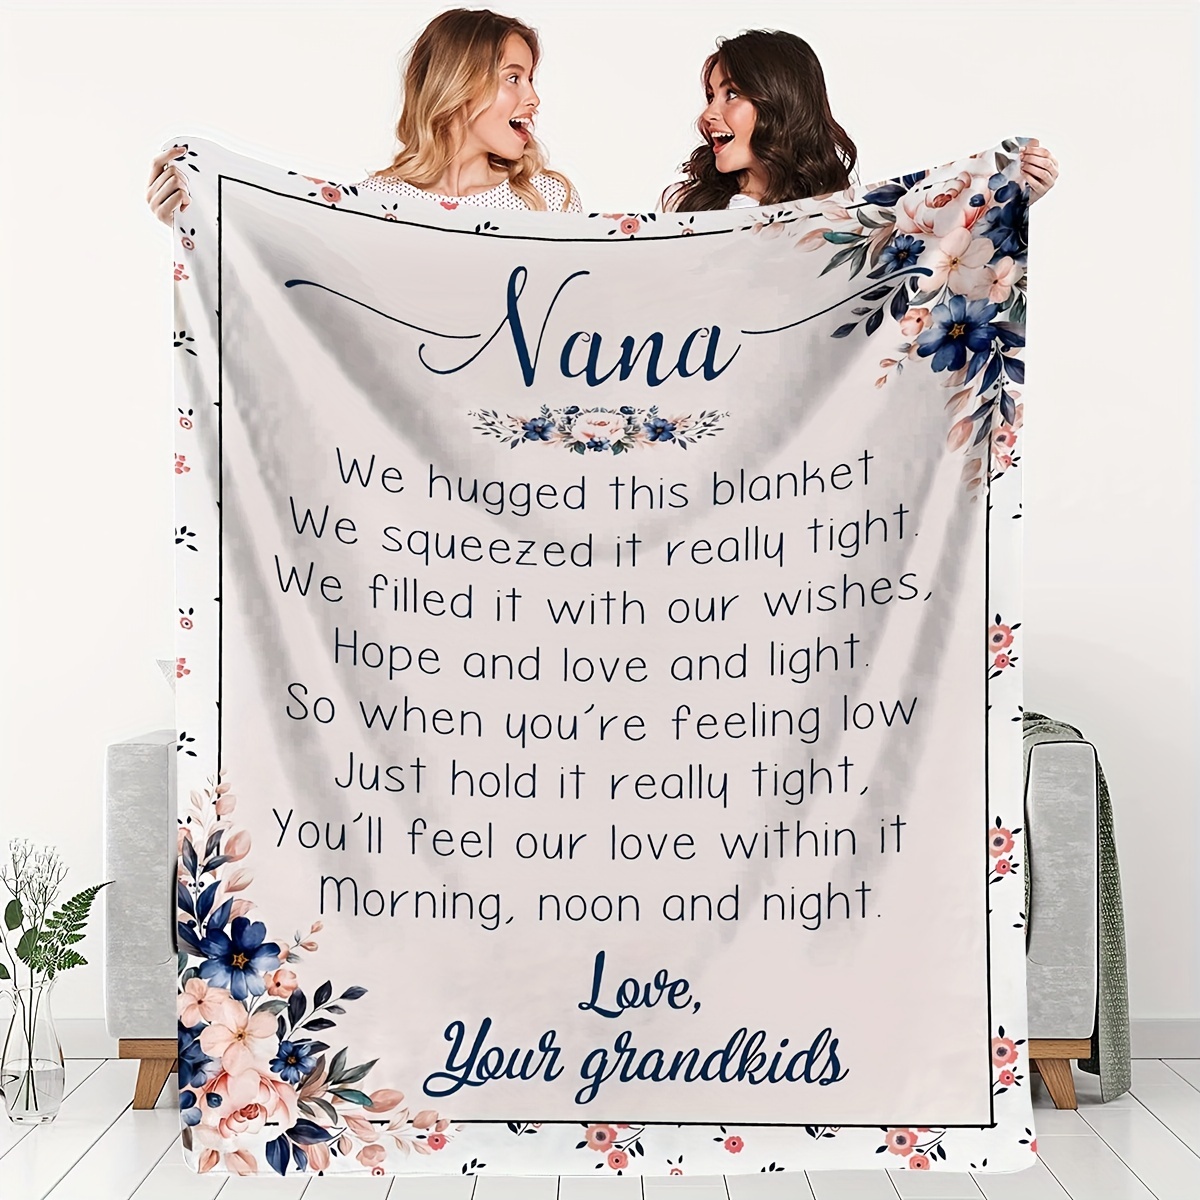 

Preppy Style Customizable Nana Throw Blanket With Floral And Heartfelt Message - Soft Flannel Fleece, All Seasons Knit, 100% Polyester, Perfect Gift For Grandmother From Grandkids